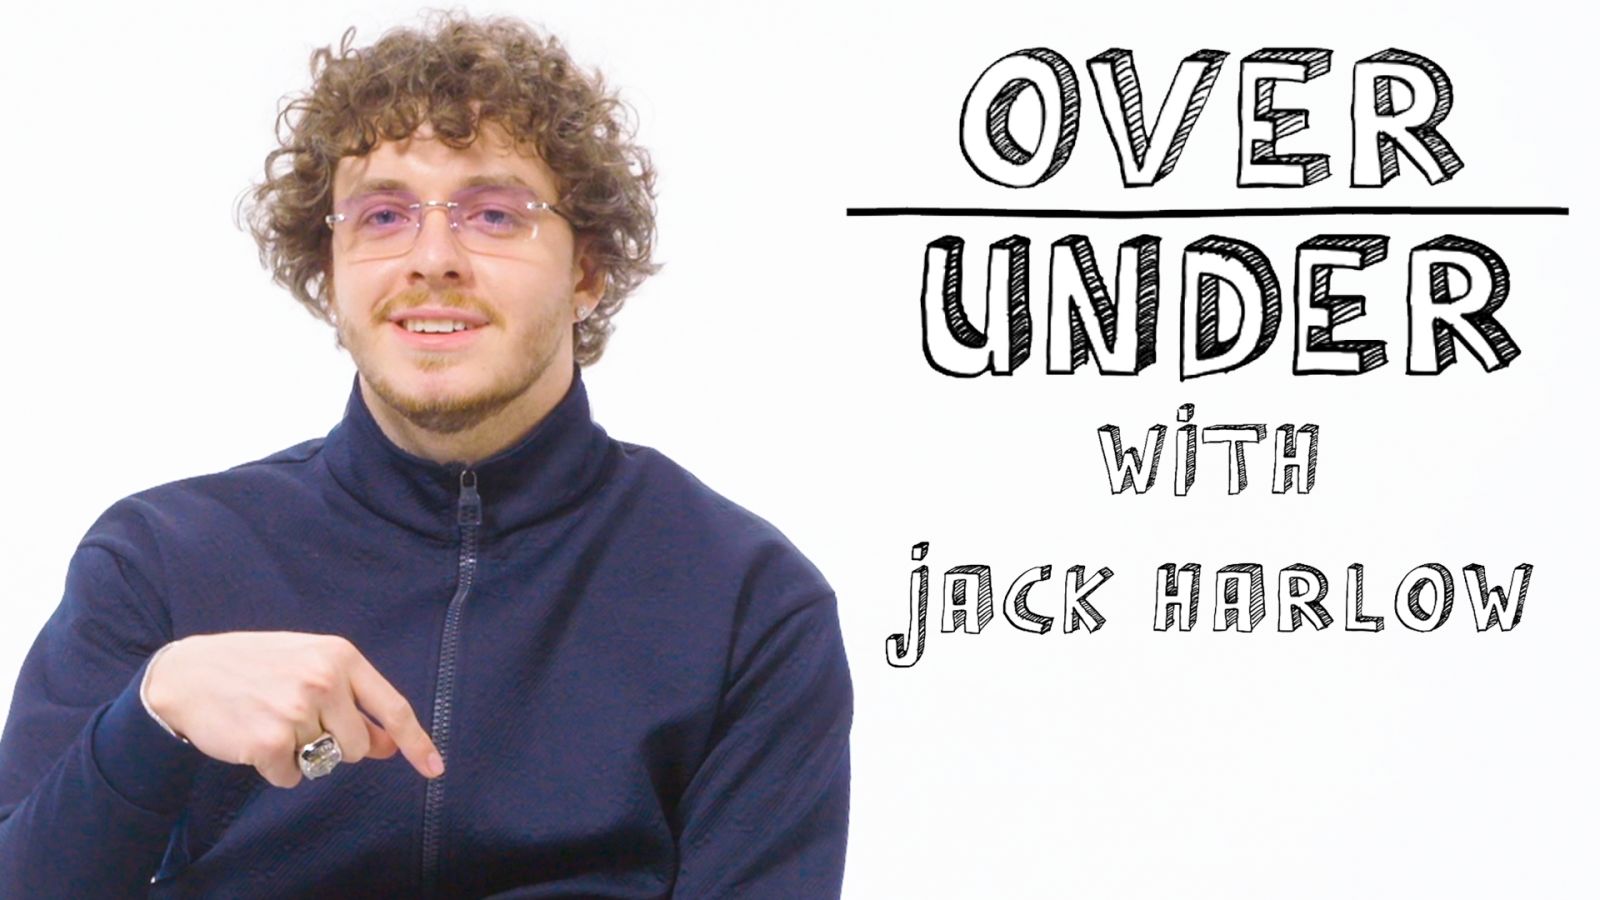 Jack Harlow Rates Eminem, Country Music and Los Angeles